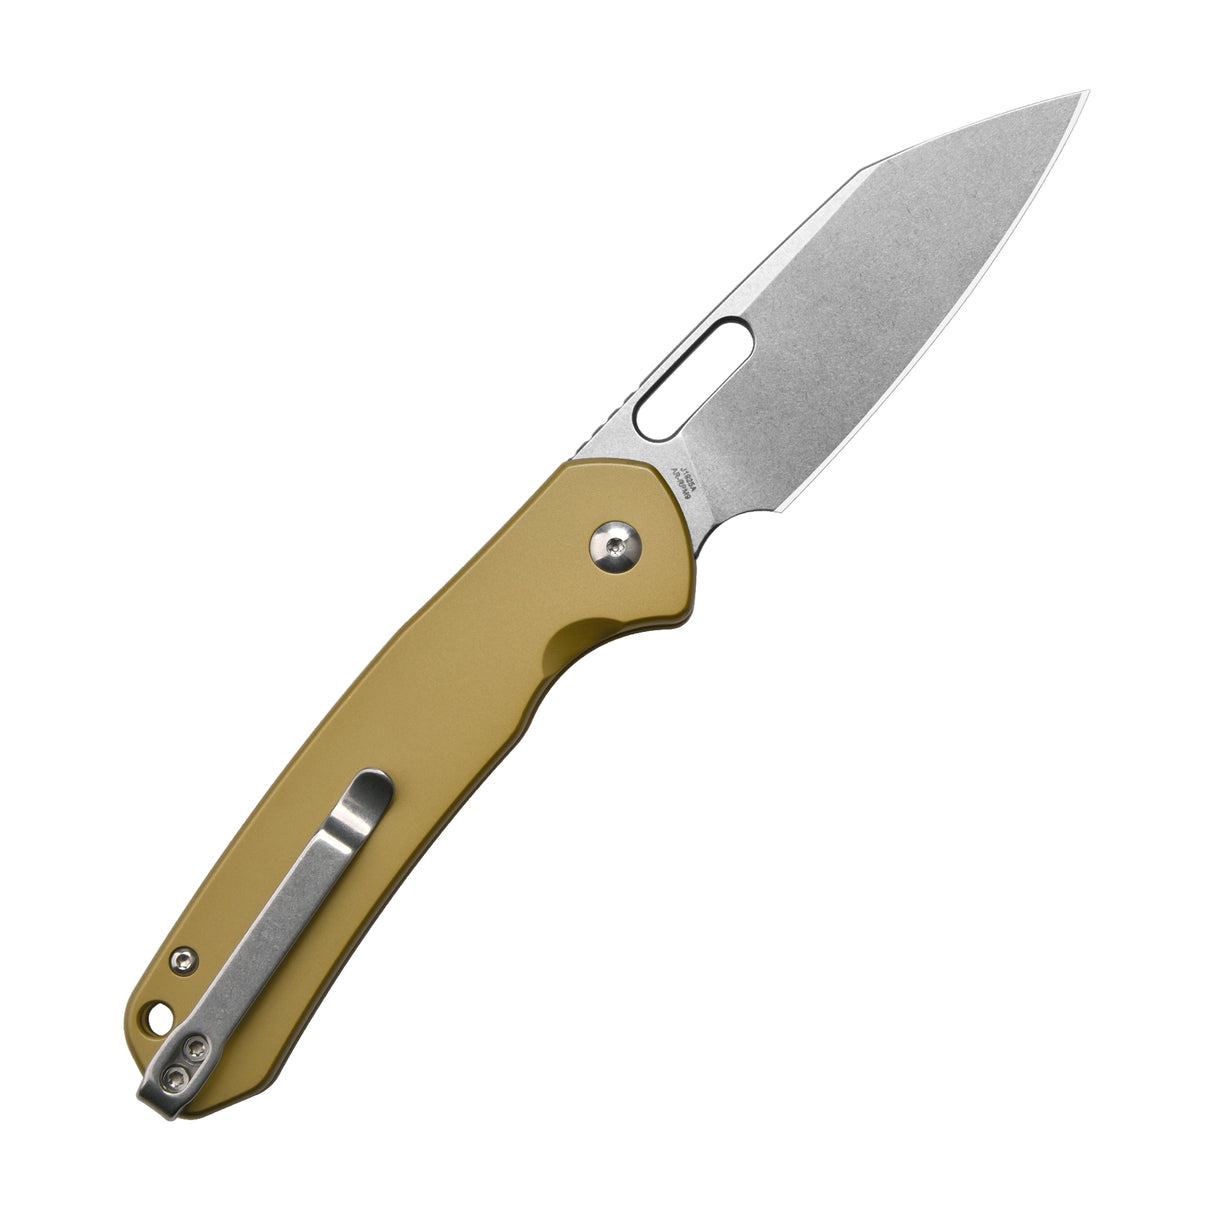 CJRB Pyrite Wharncliffe J1925A AR-RPM9 Steel Blade Steel Handle Folding Knives Brass Steel Color